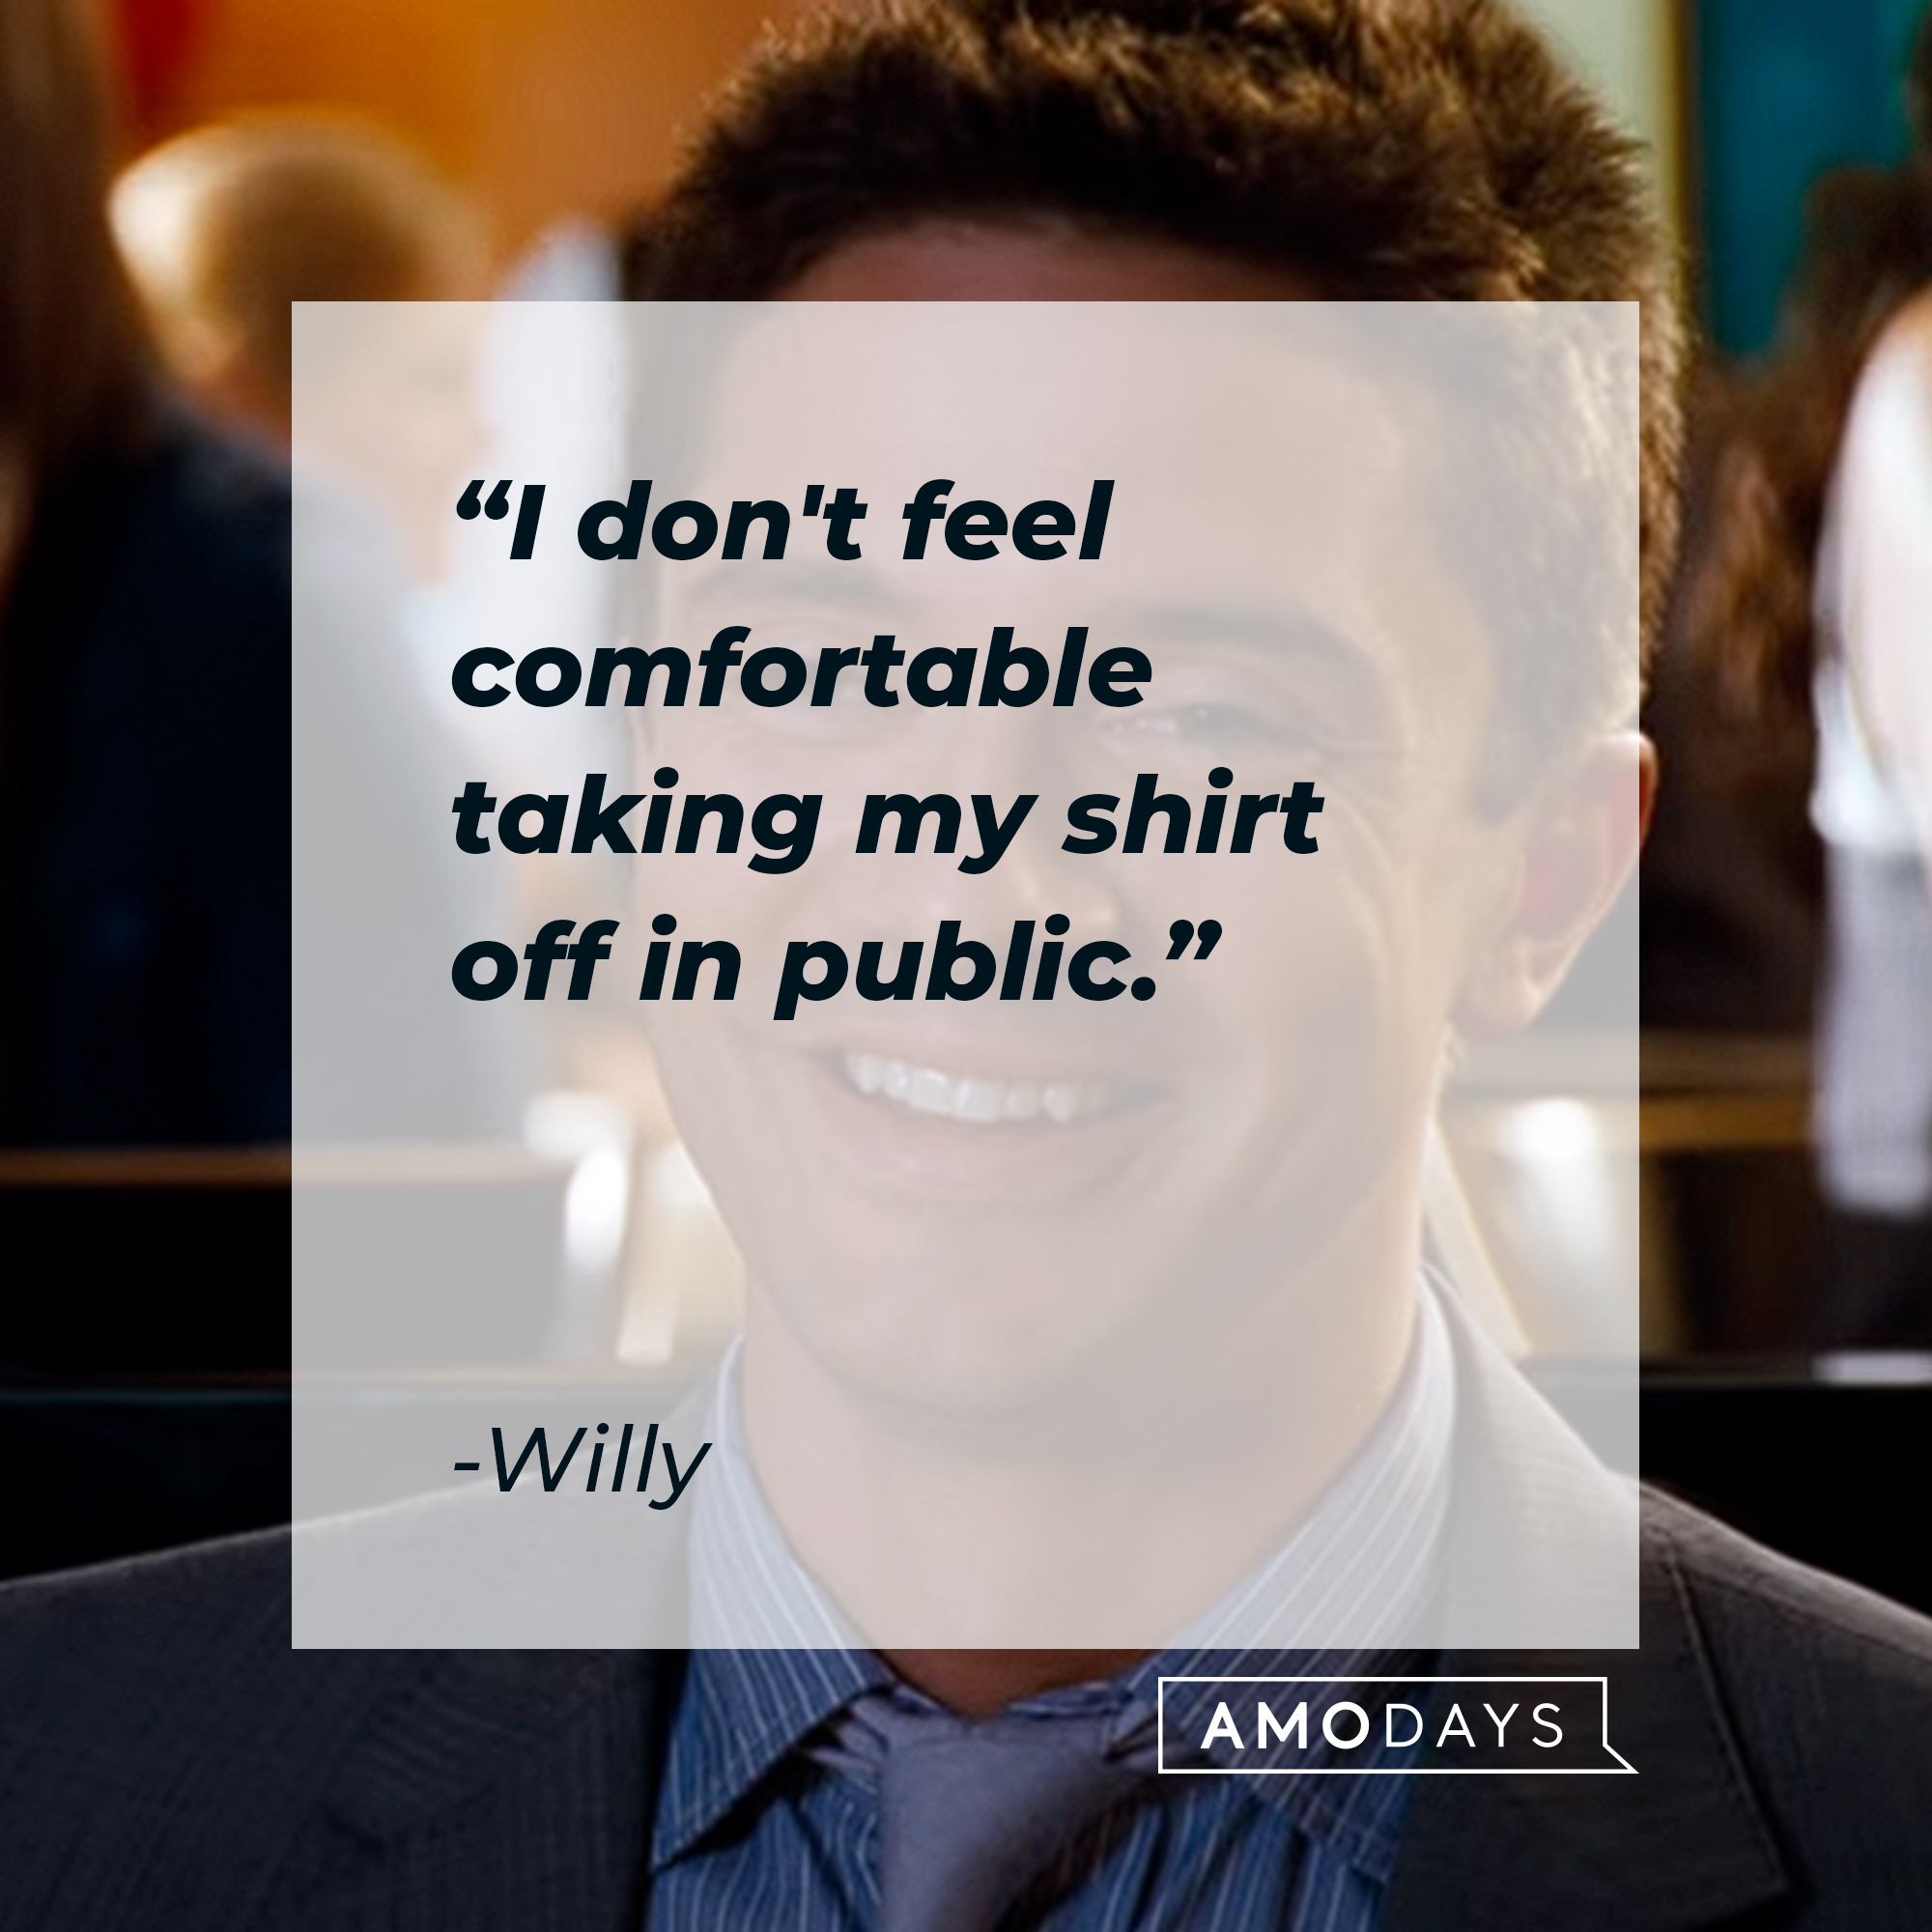 Willy's quote: "I don't feel comfortable taking my shirt off in public" | Source: Youtube.com/WarnerBrosPictures